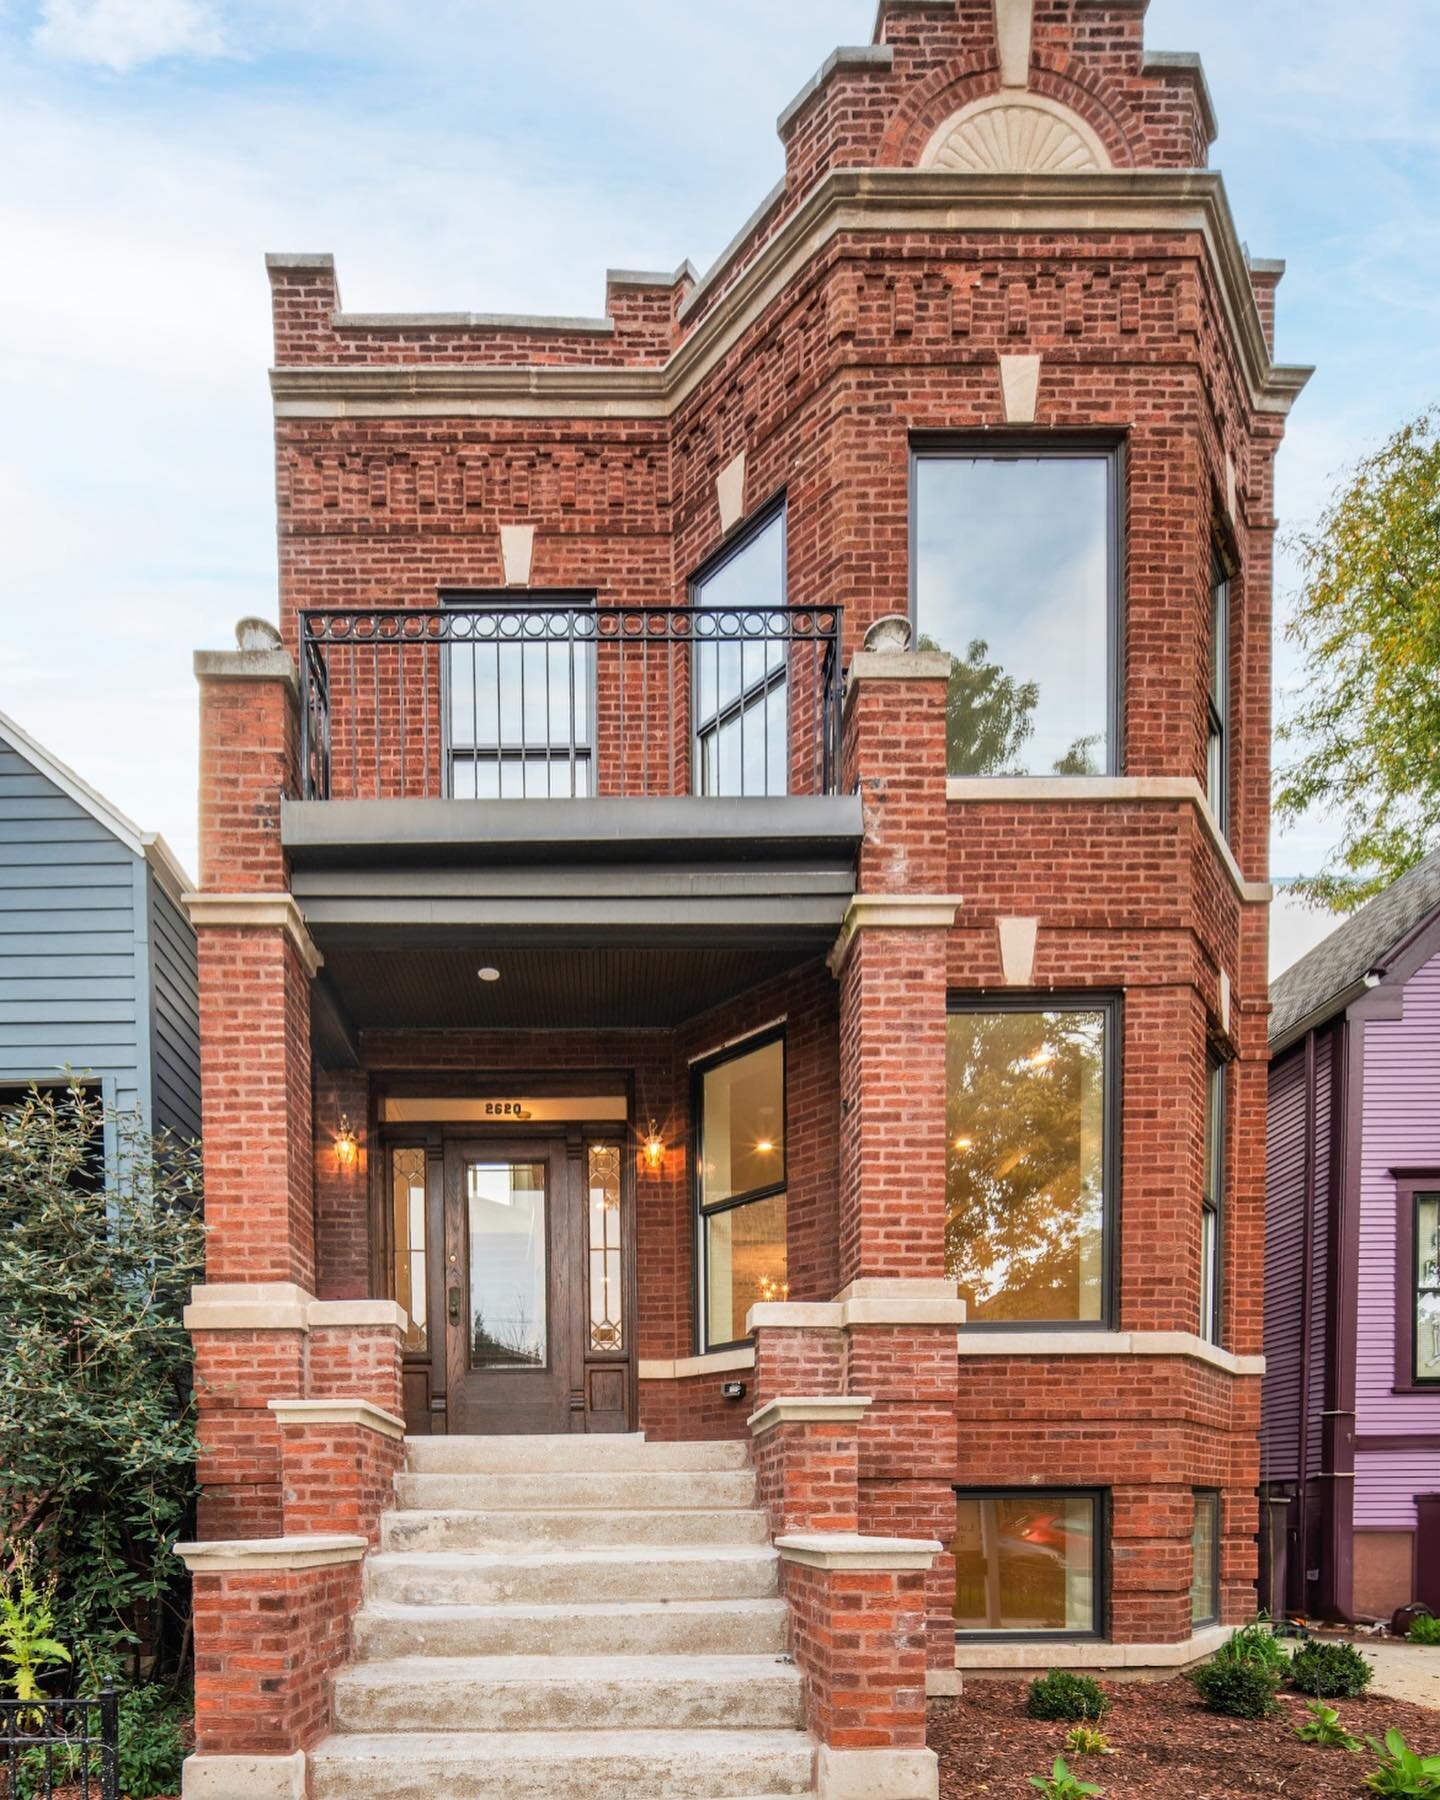 We kept some of the classic charm and brought in modern updates- the result is something to be truly excited about !
.
.
.
#fridayvibes #residentialremodeling #chicagoarchitect #chicagoflip #pavlovcikarchitecture